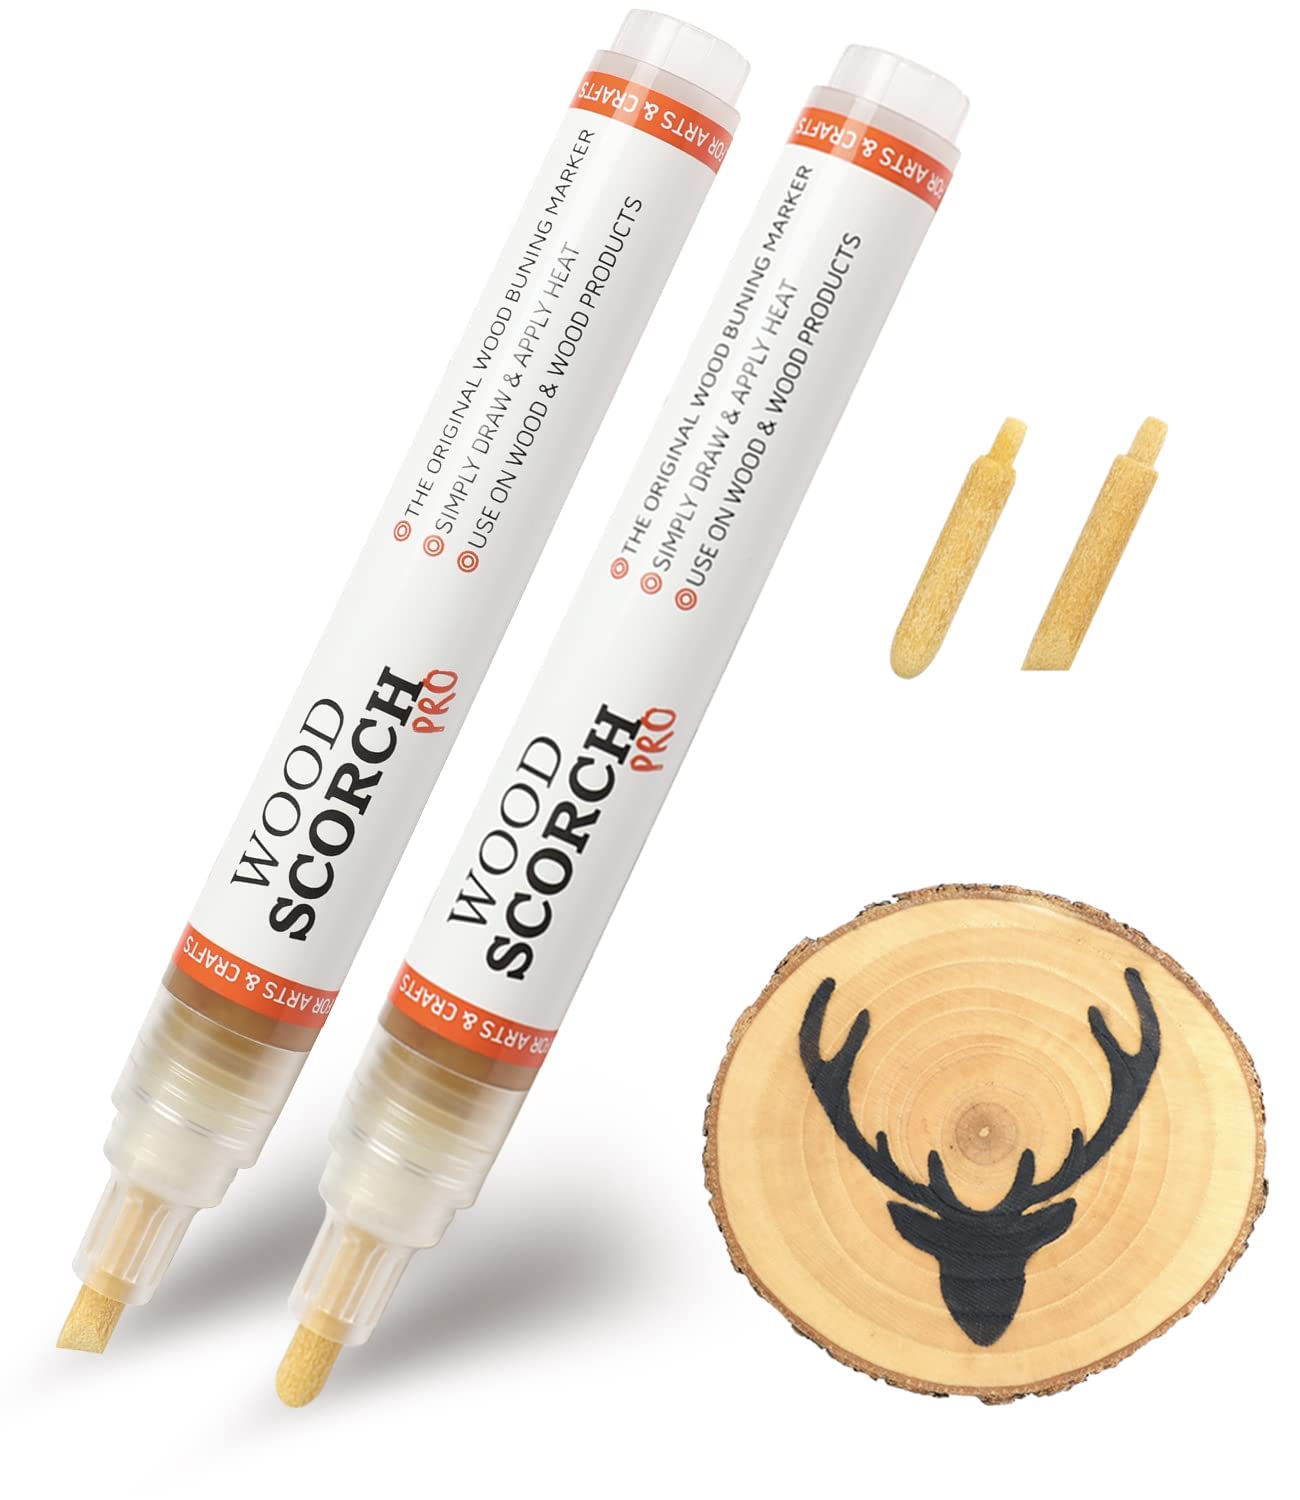 Scorch Marker Pro product review - wood burning product review 